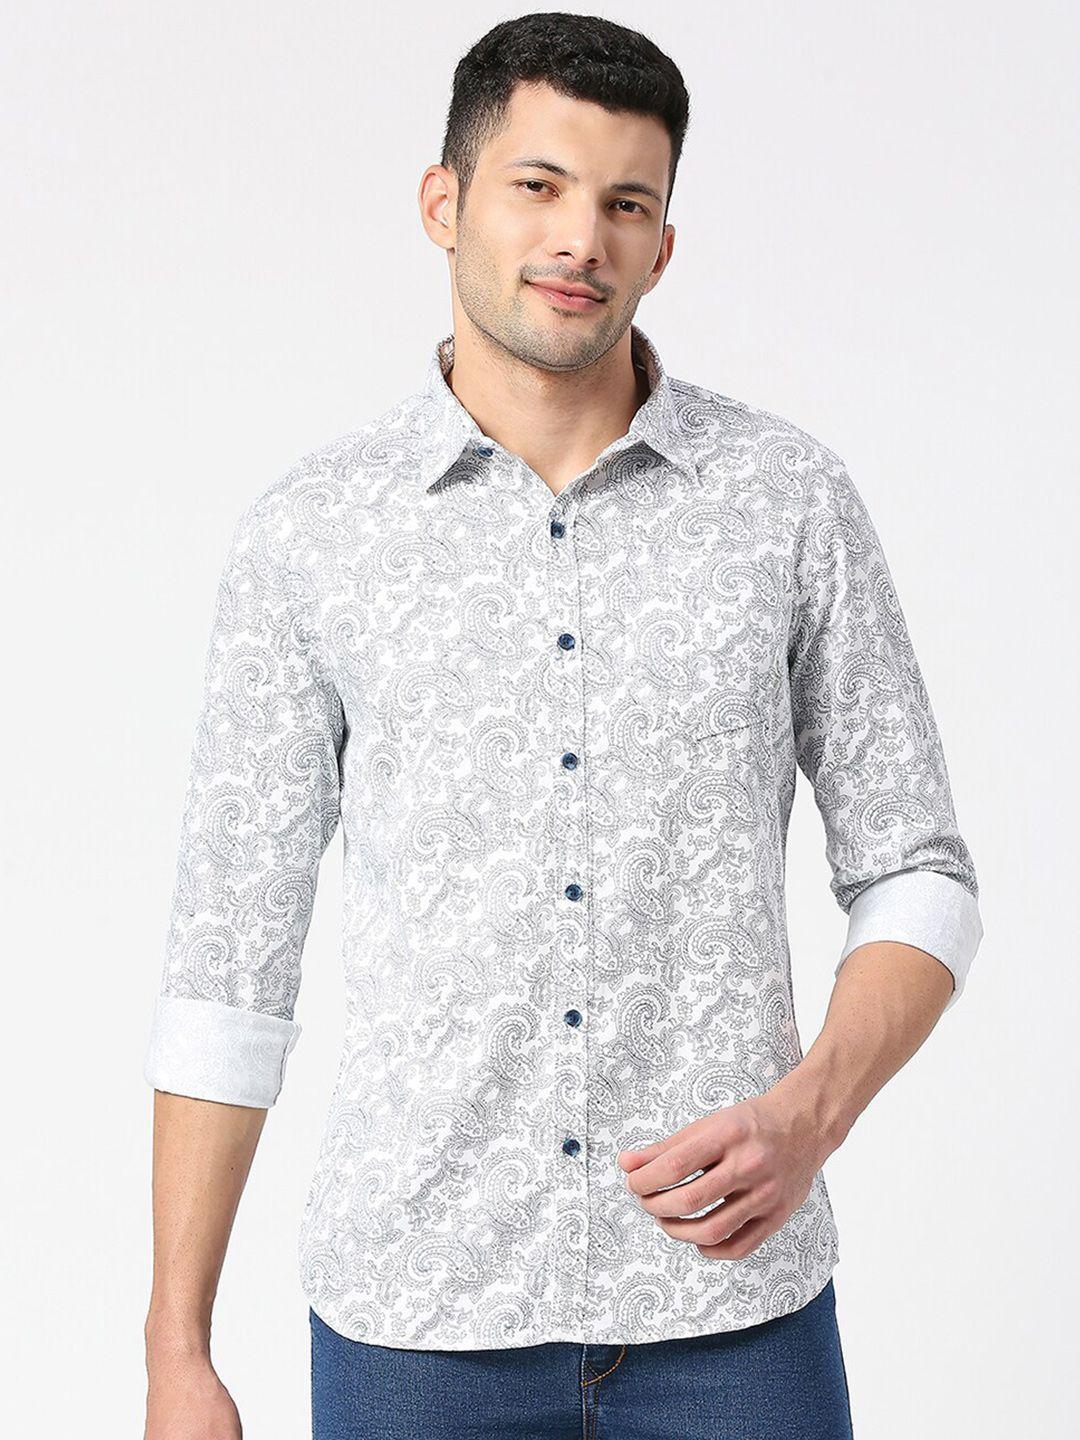 snx men tailored fit paisley printed cotton casual shirt